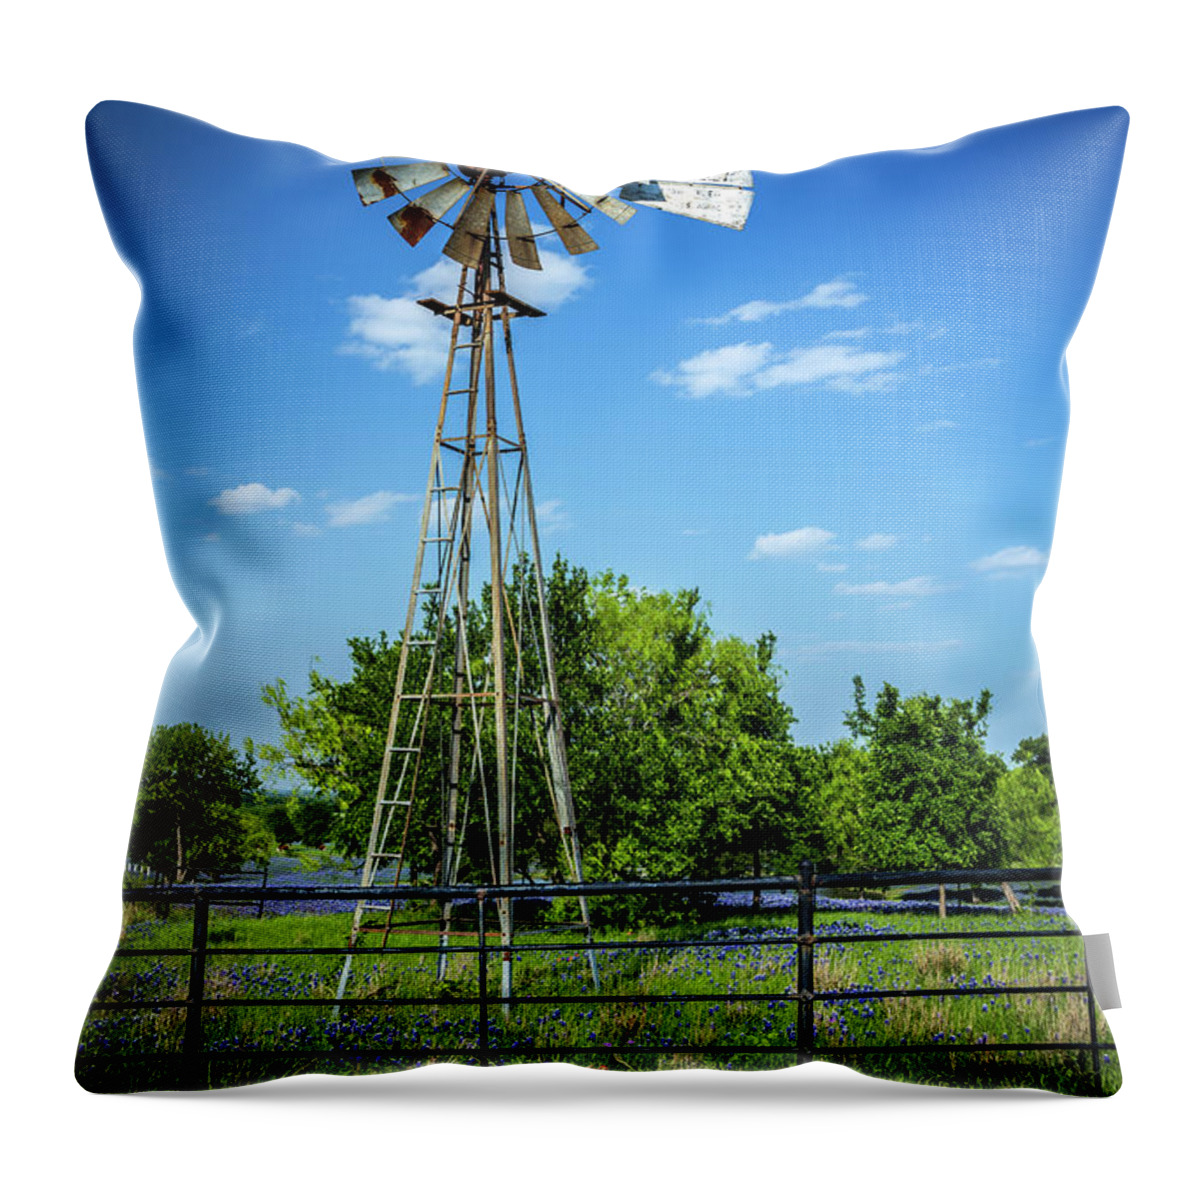 Bluebonnets Throw Pillow featuring the photograph No Wind Today by Tom Weisbrook